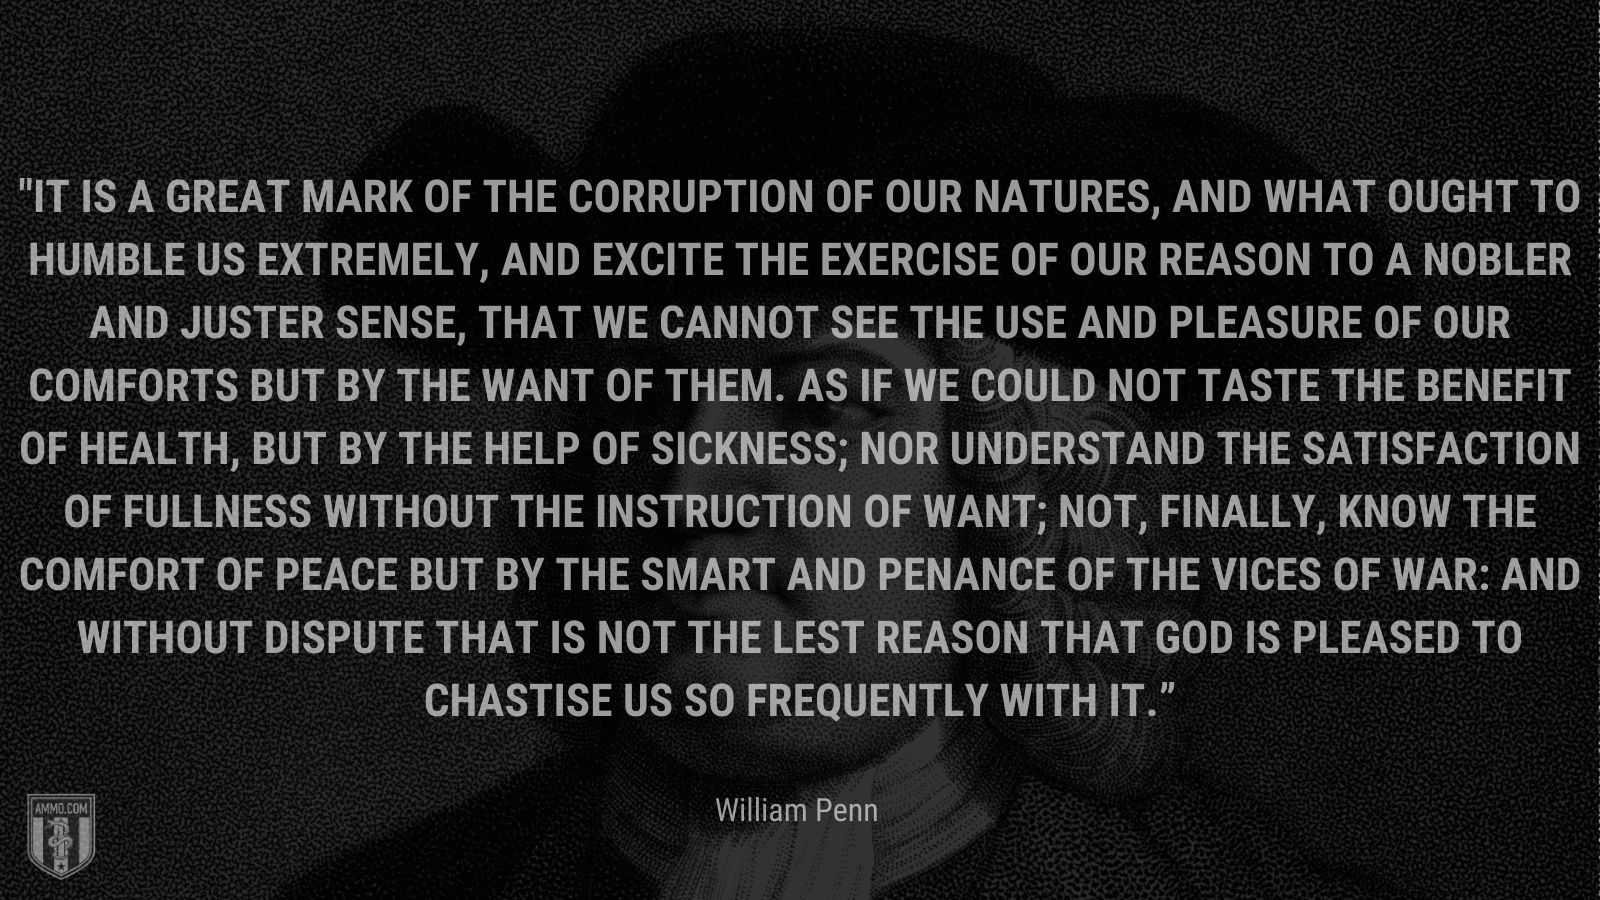 “It is a great mark of the corruption of our natures, and what ought to humble us extremely, and excite the exercise of our reason to a nobler and juster sense, that we cannot see the use and pleasure of our comforts but by the want of them. As if we could not taste the benefit of health, but by the help of sickness; nor understand the satisfaction of fullness without the instruction of want; not, finally, know the comfort of peace but by the smart and penance of the vices of war: And without dispute that is not the lest reason that God is pleased to chastise us so frequently with it.” - William Penn